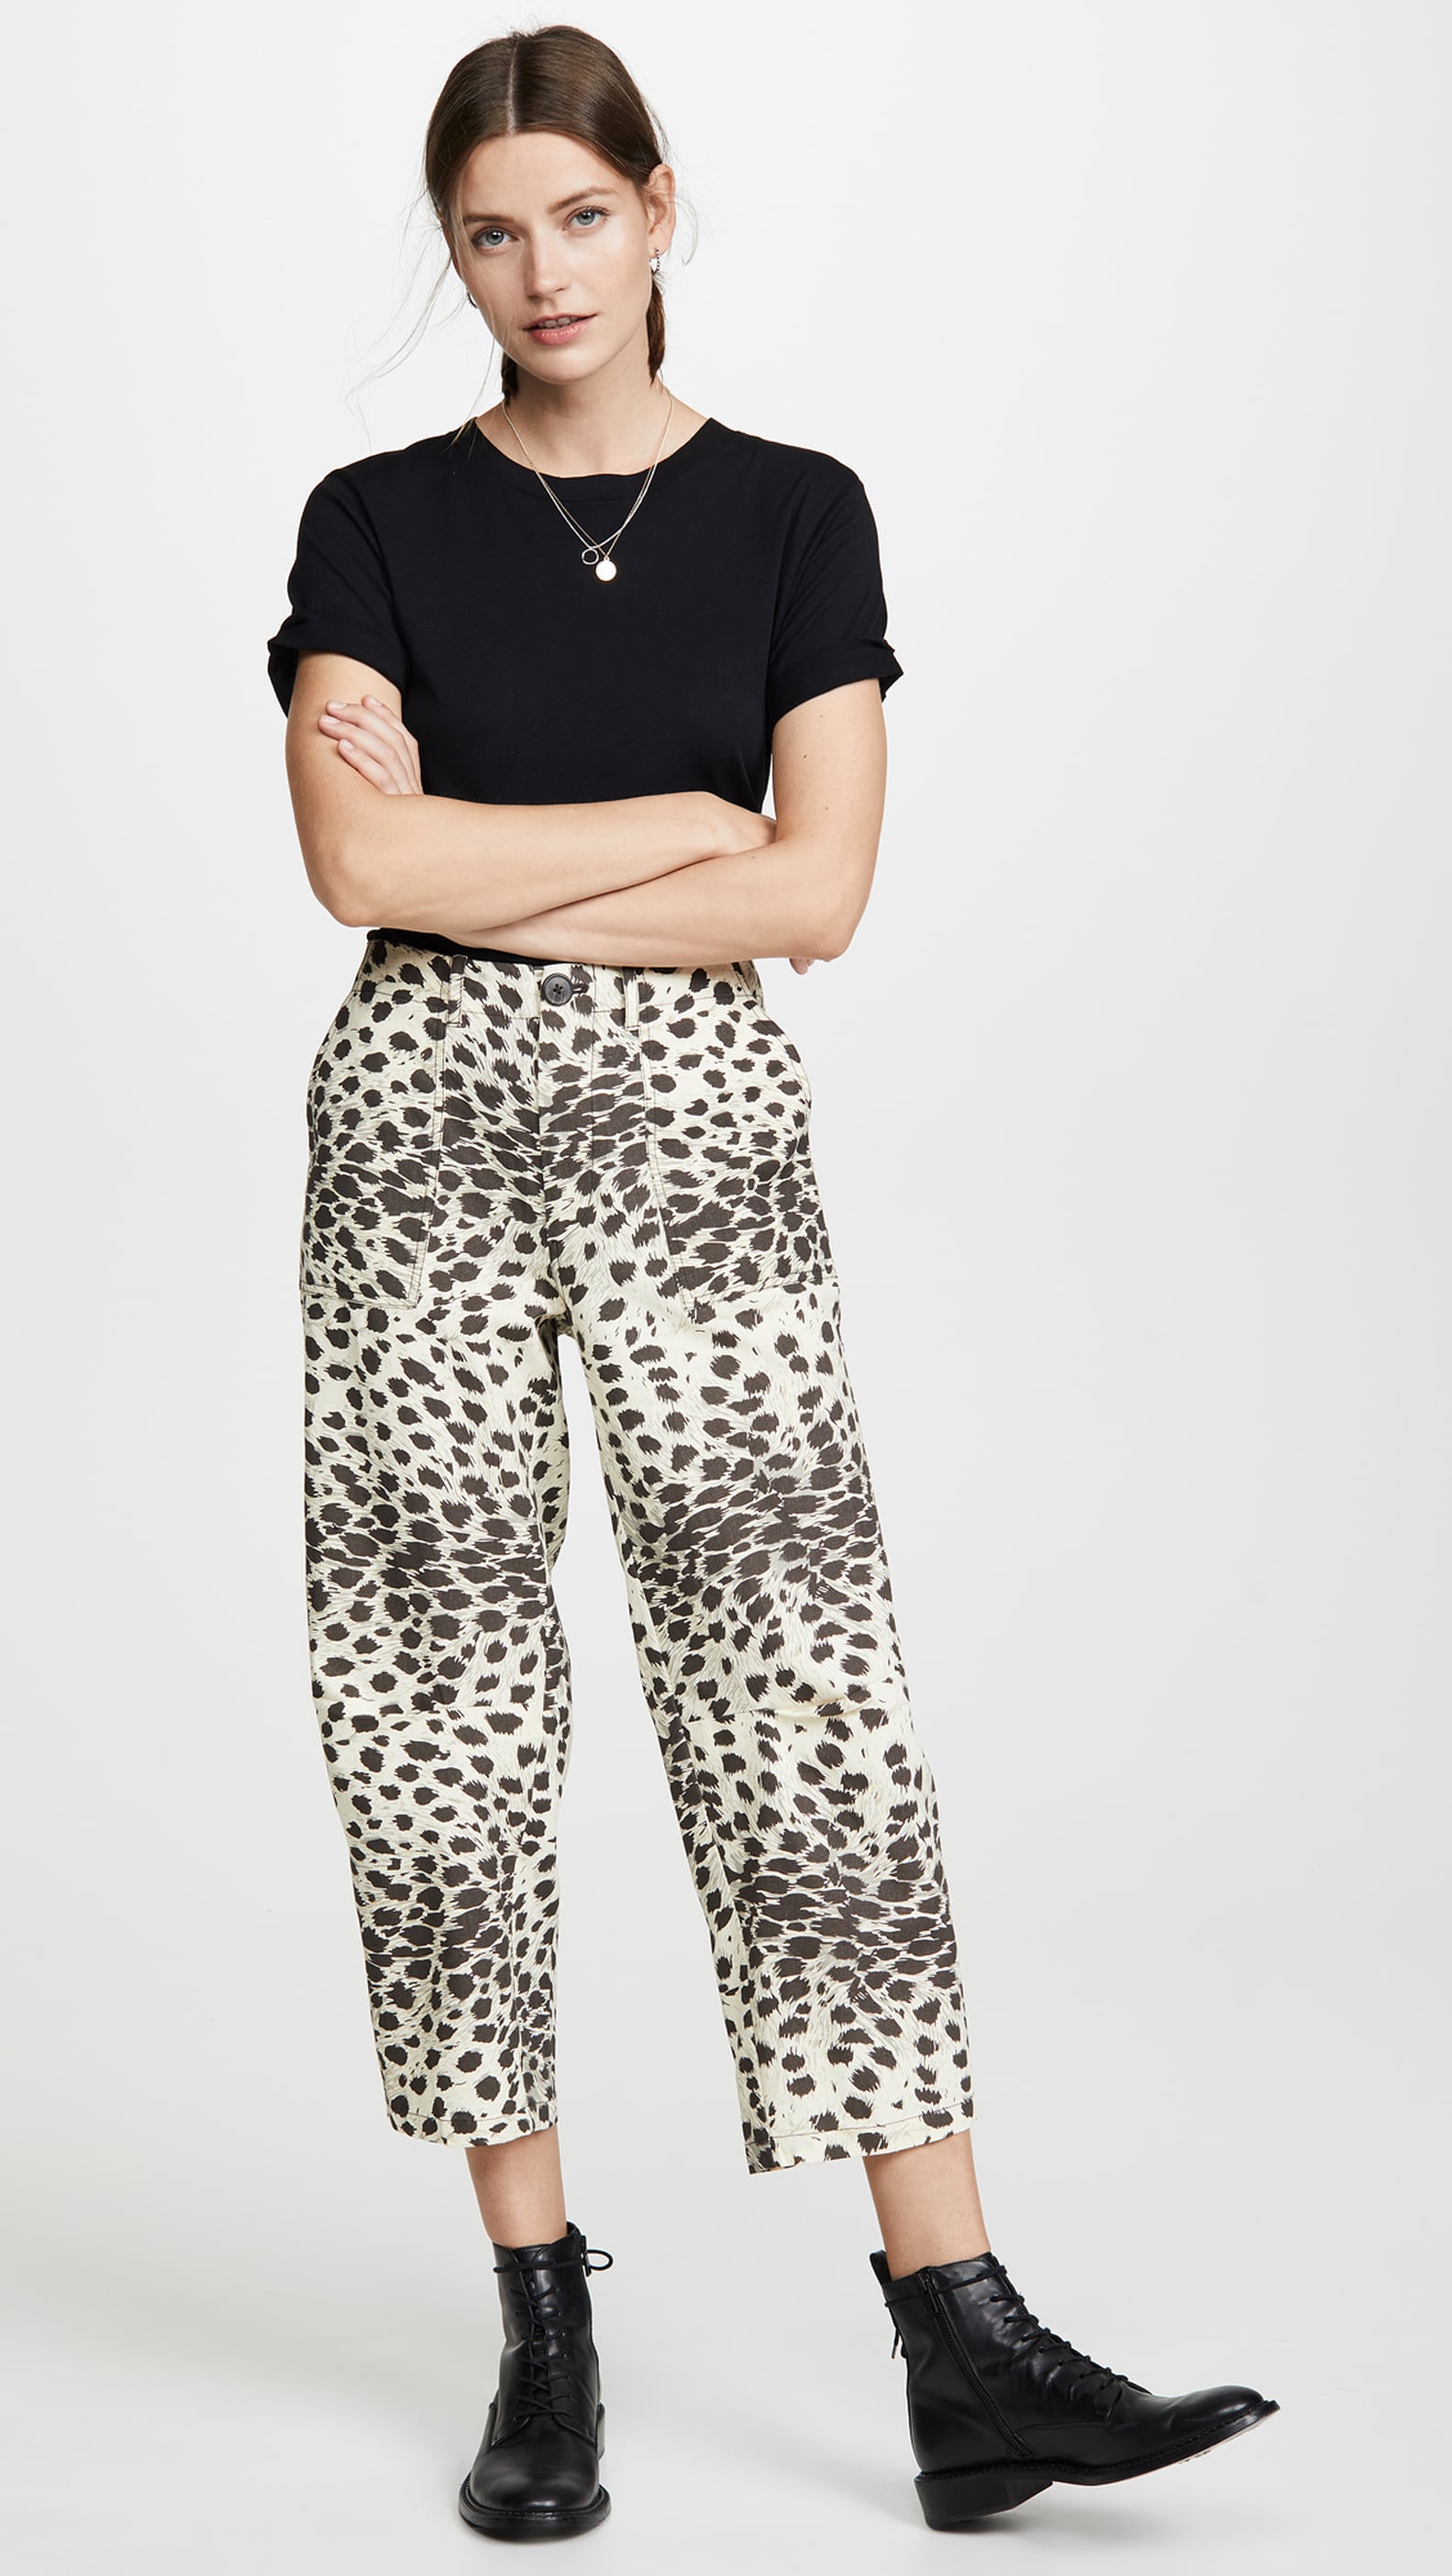 The Best Fall Pants Trends to Shop For Women | POPSUGAR Fashion